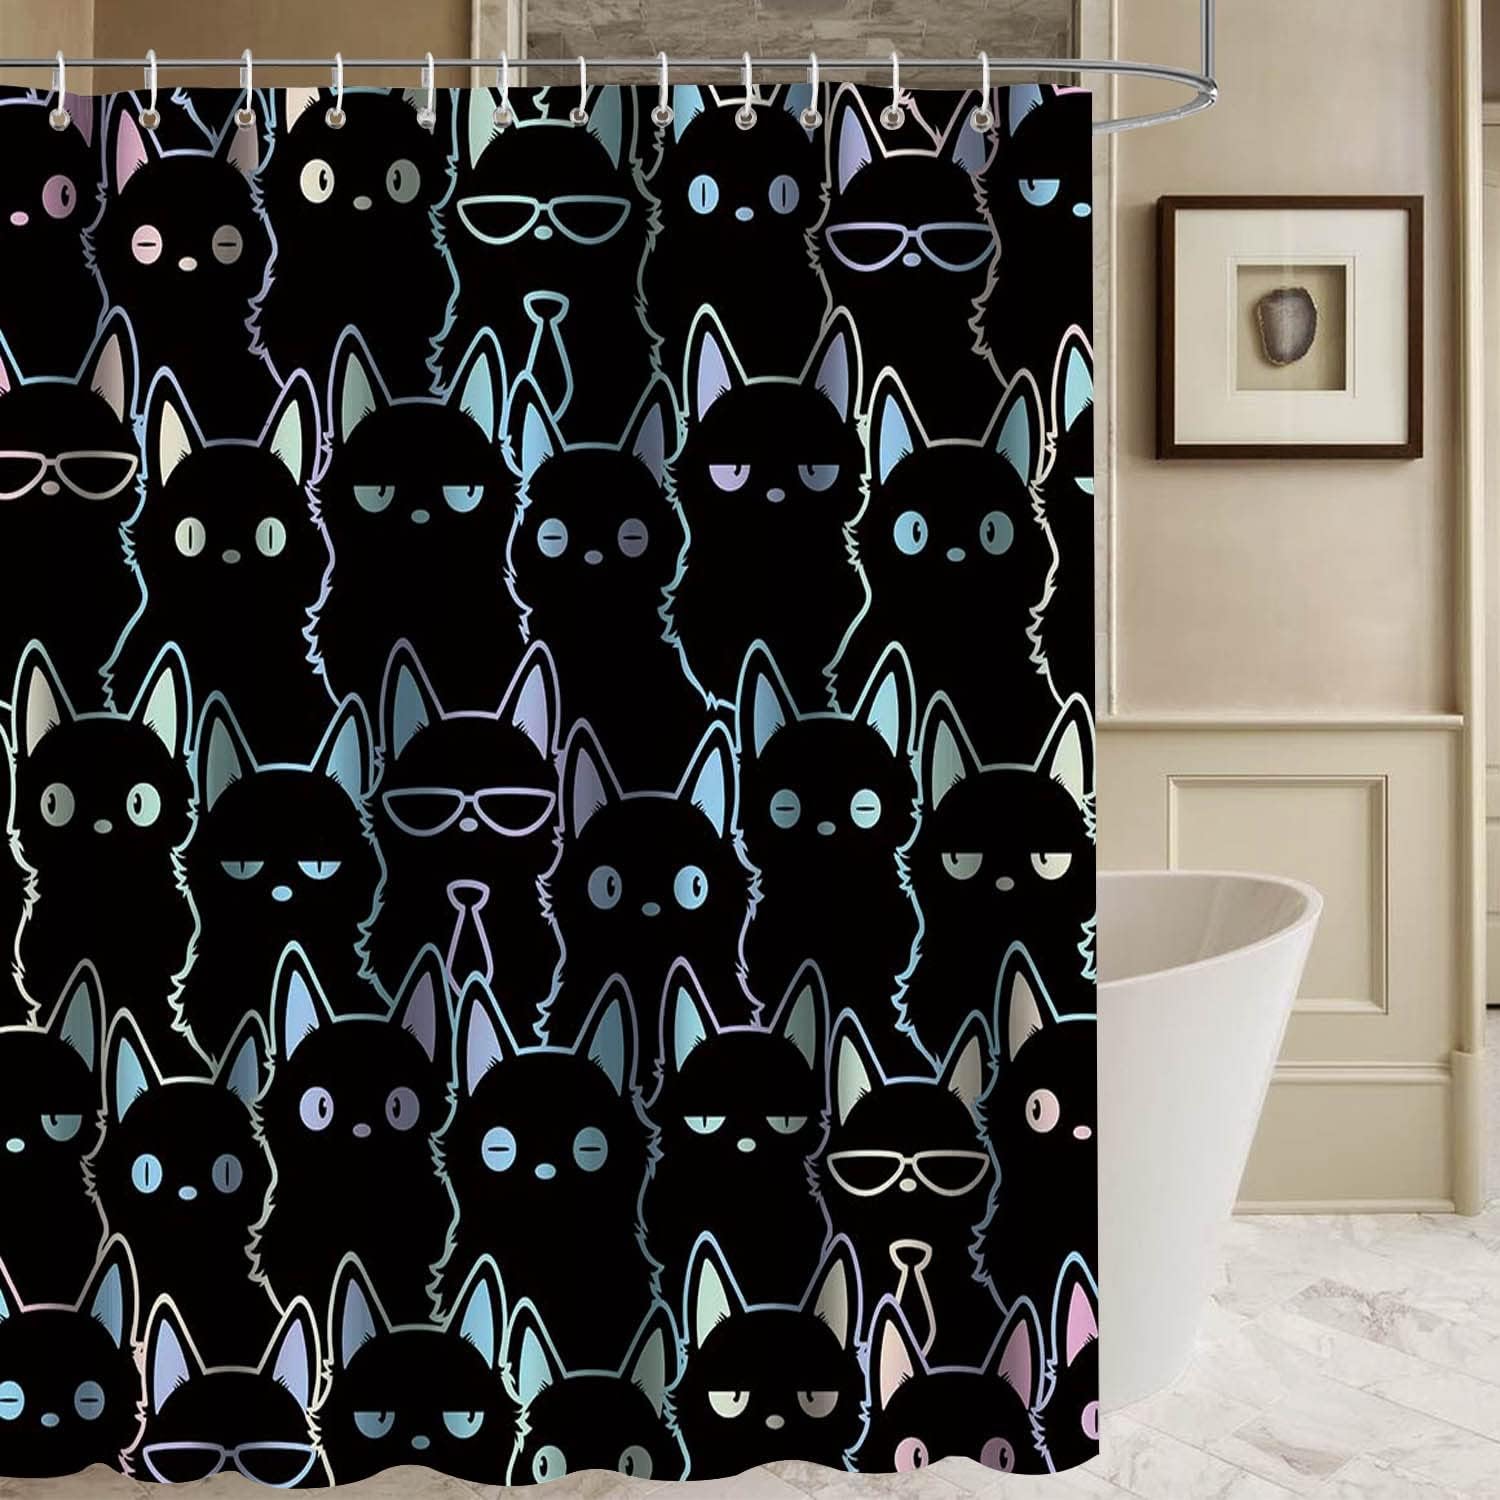 APROPHIC Funny Cat Shower Curtain Black Cute Animals Theme Cool Kitty Shower Curtain Review